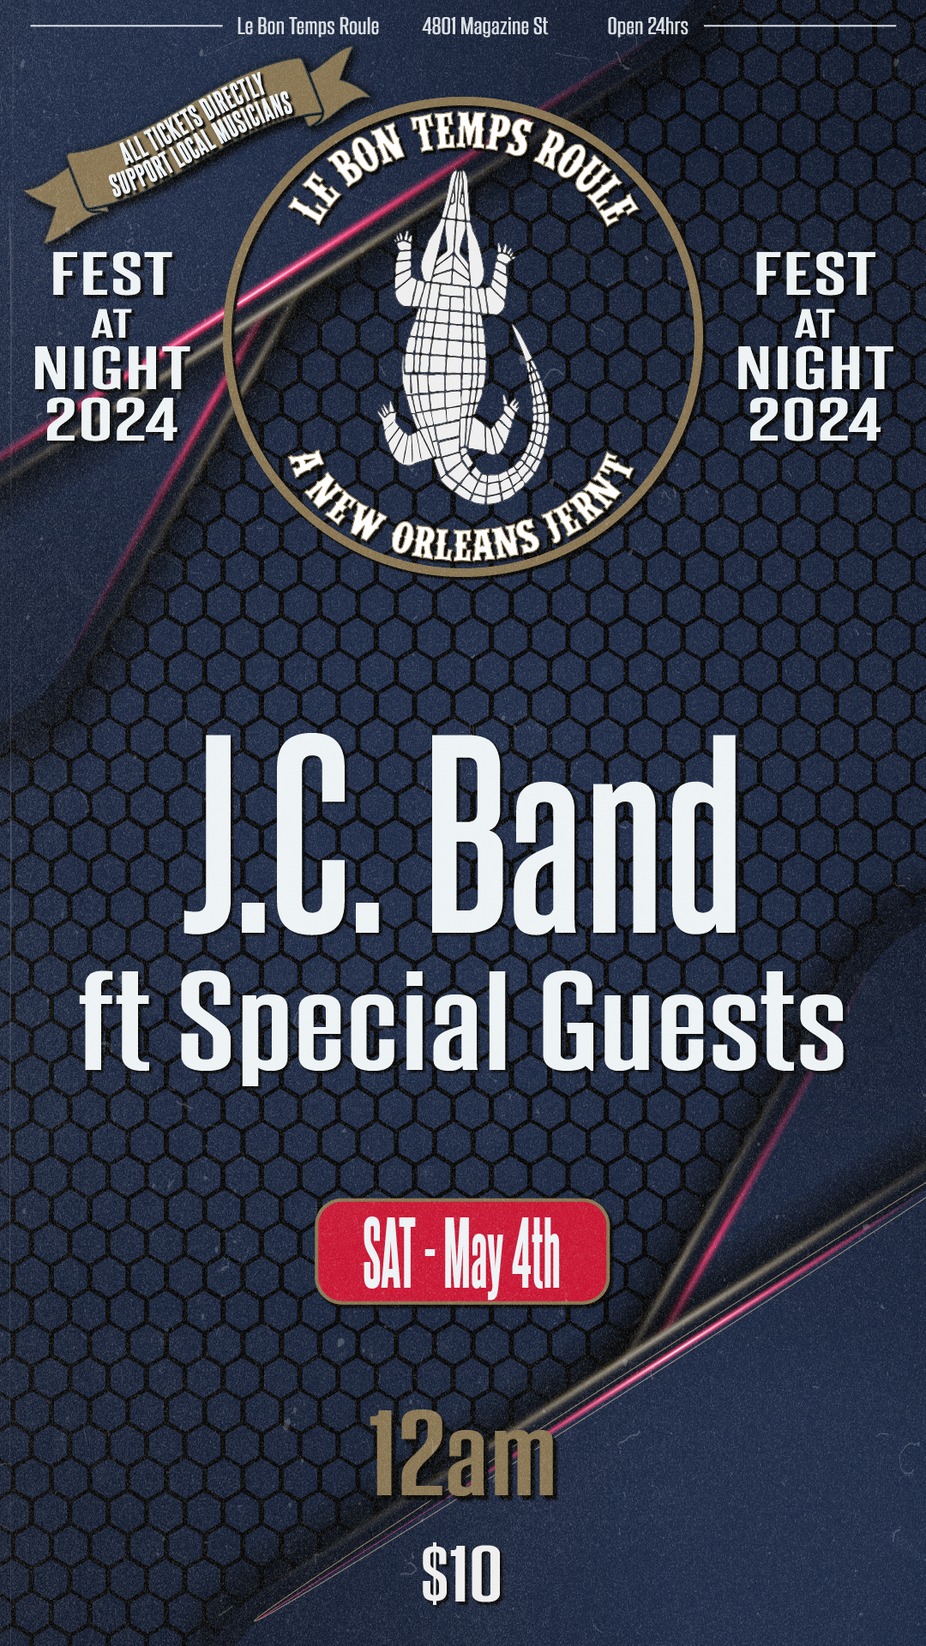 JC Band ft Special Guests event photo